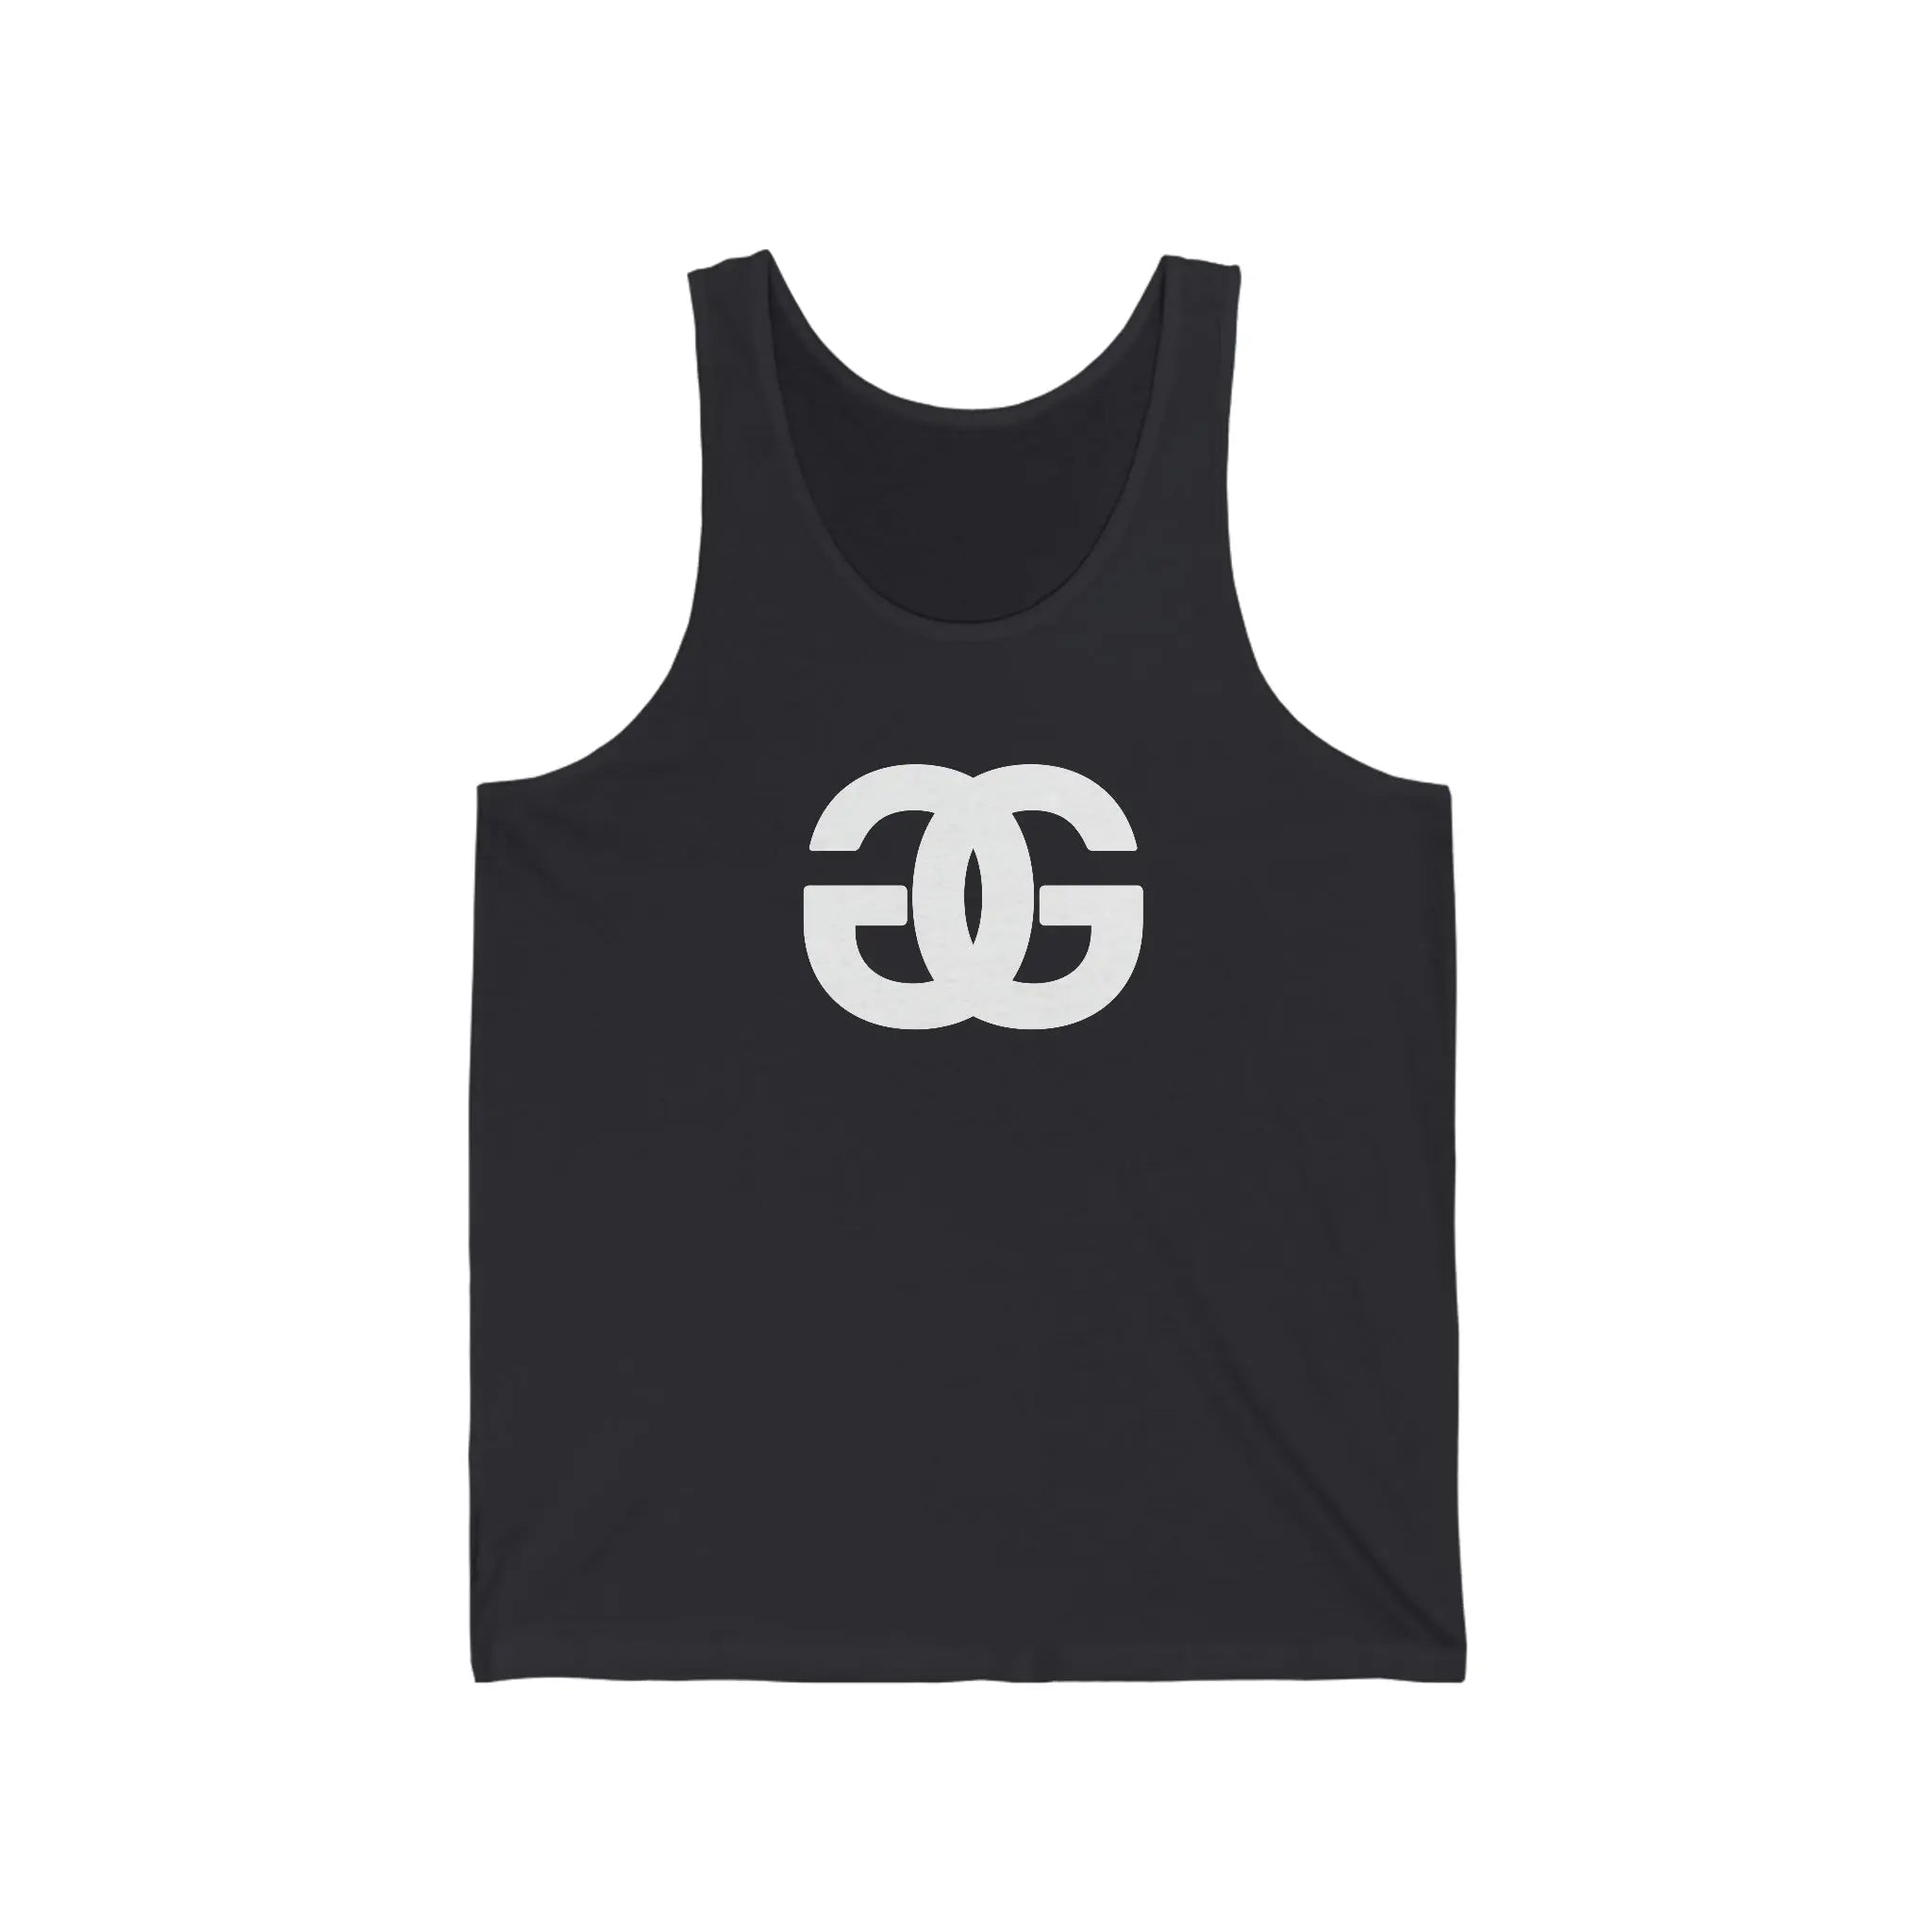  G is for Groove Relaxed Fit Jersey Tank Tank Top2XLDarkGrey